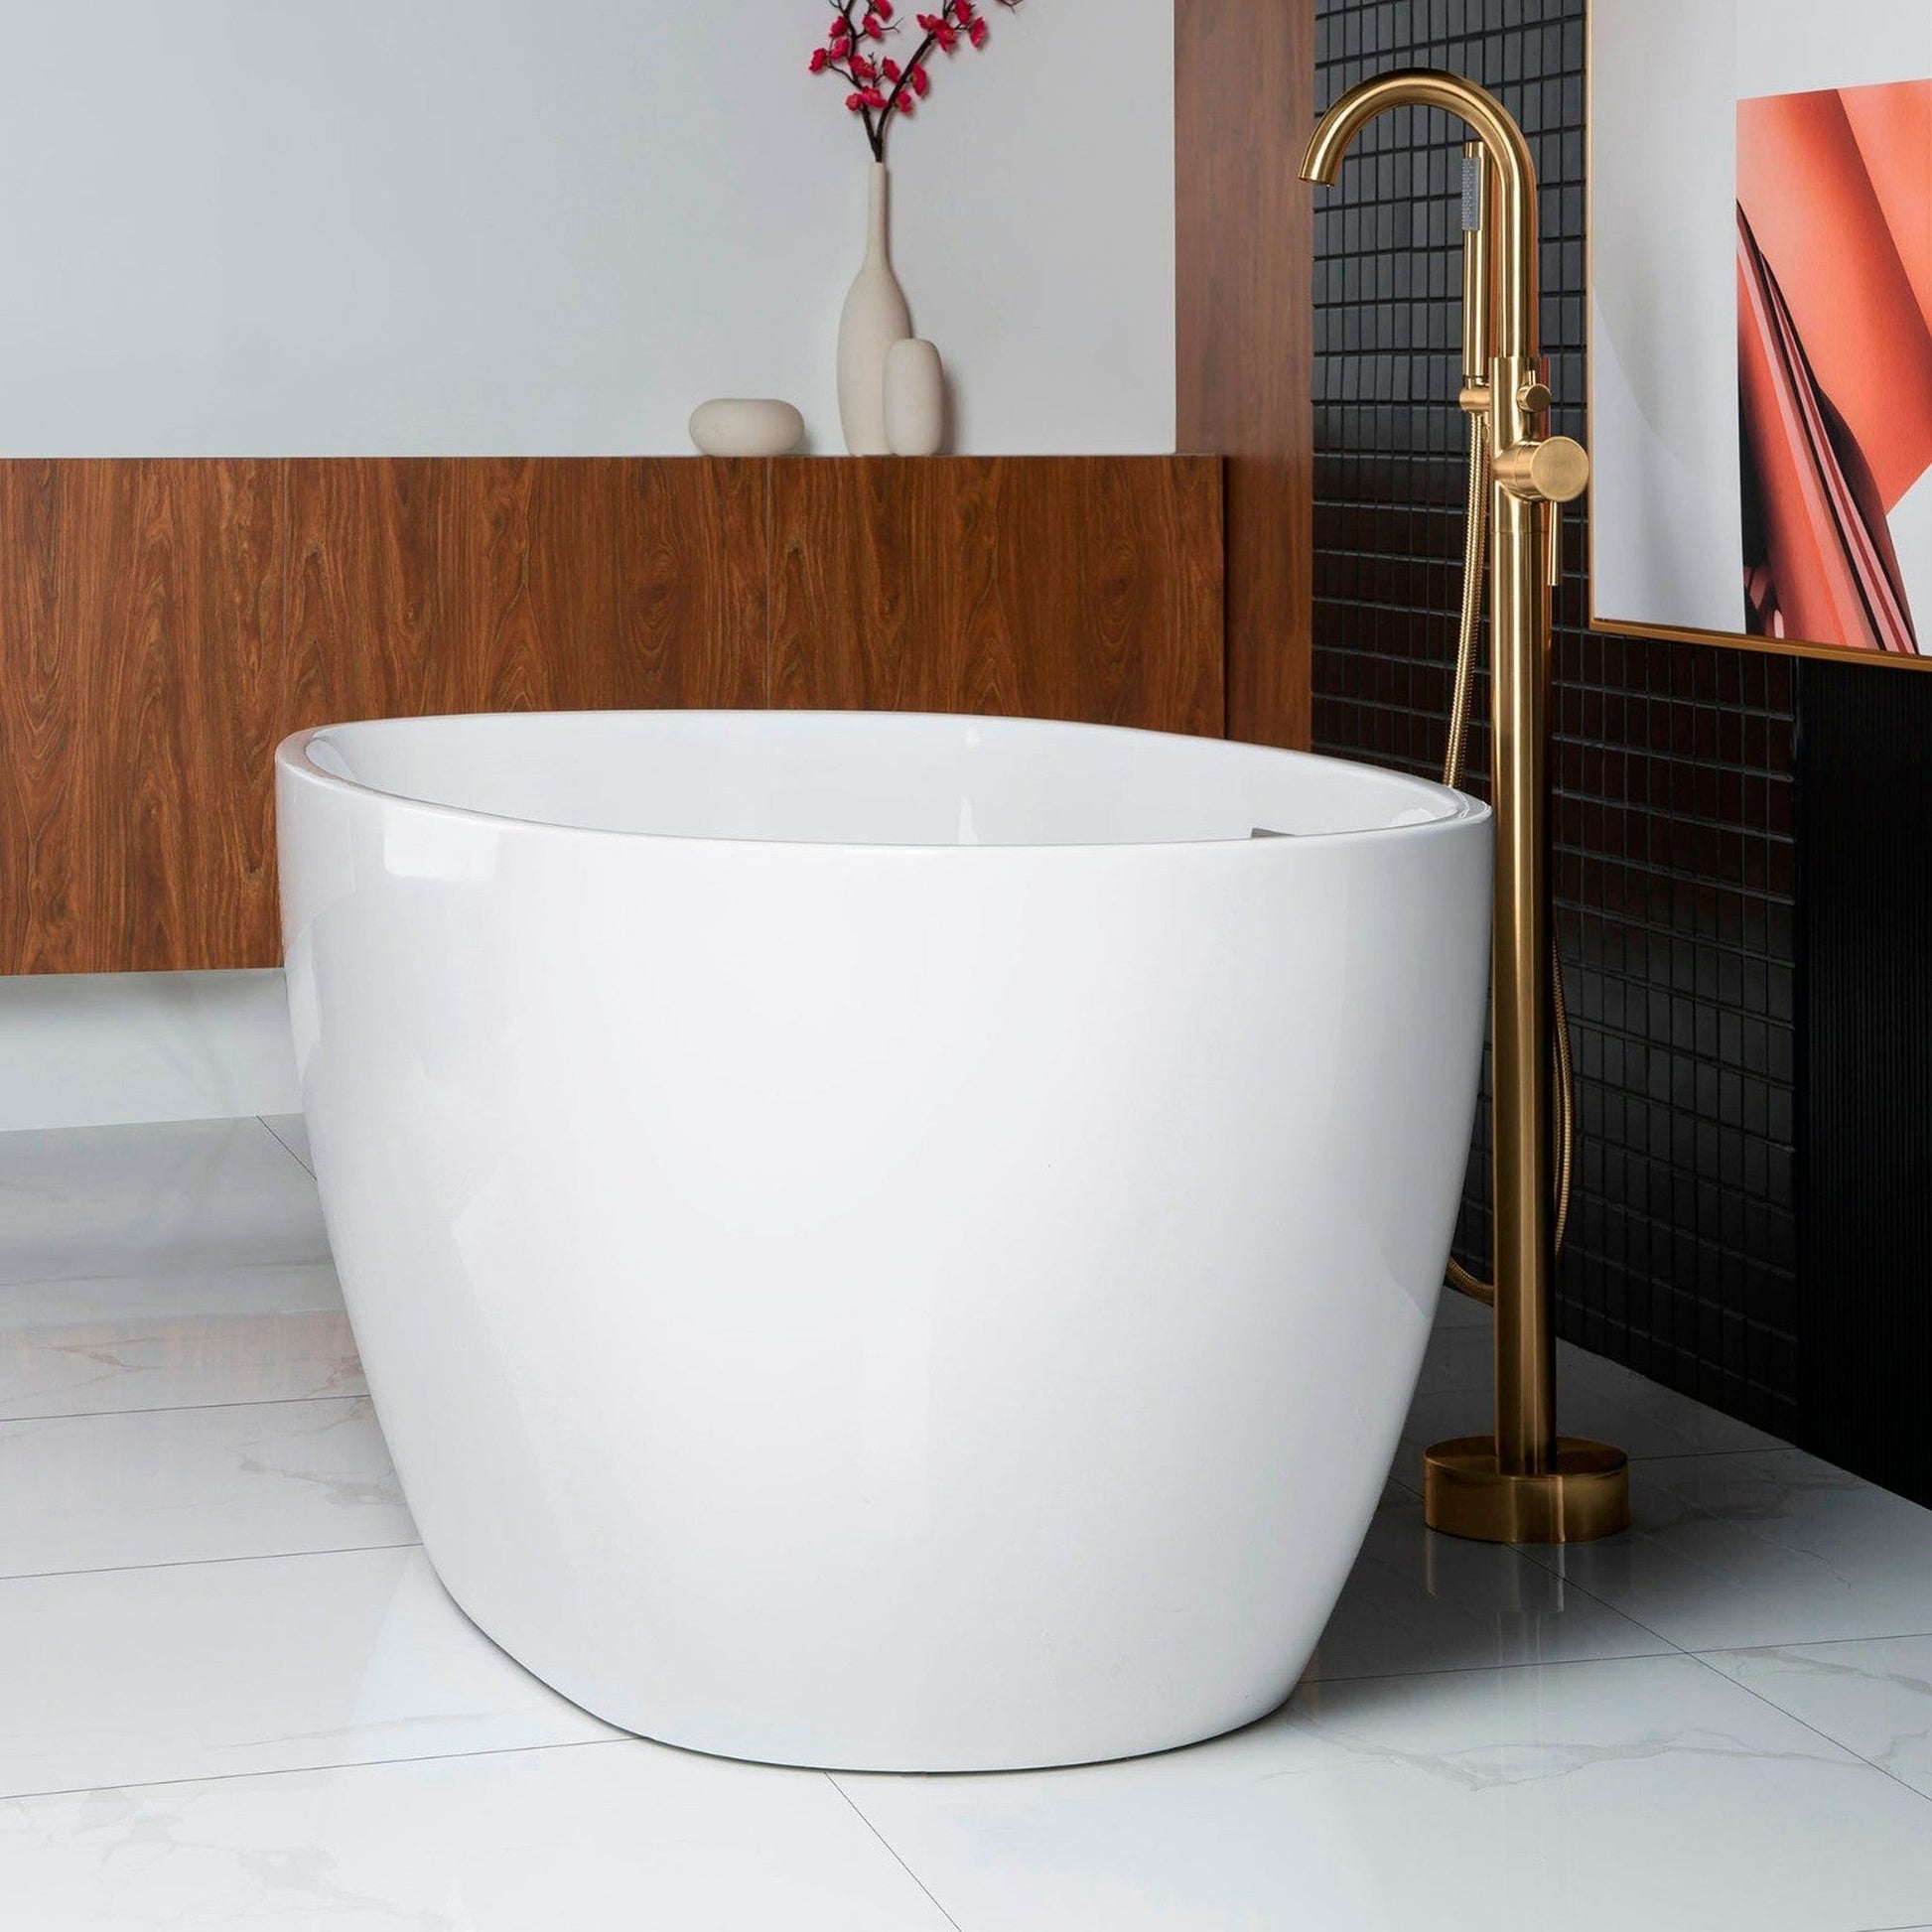 WoodBridge B0018 59" White Acrylic Freestanding Soaking Bathtub With Brushed Gold Drain, Overflow, F0073BGVT Tub Filler and Caddy Tray